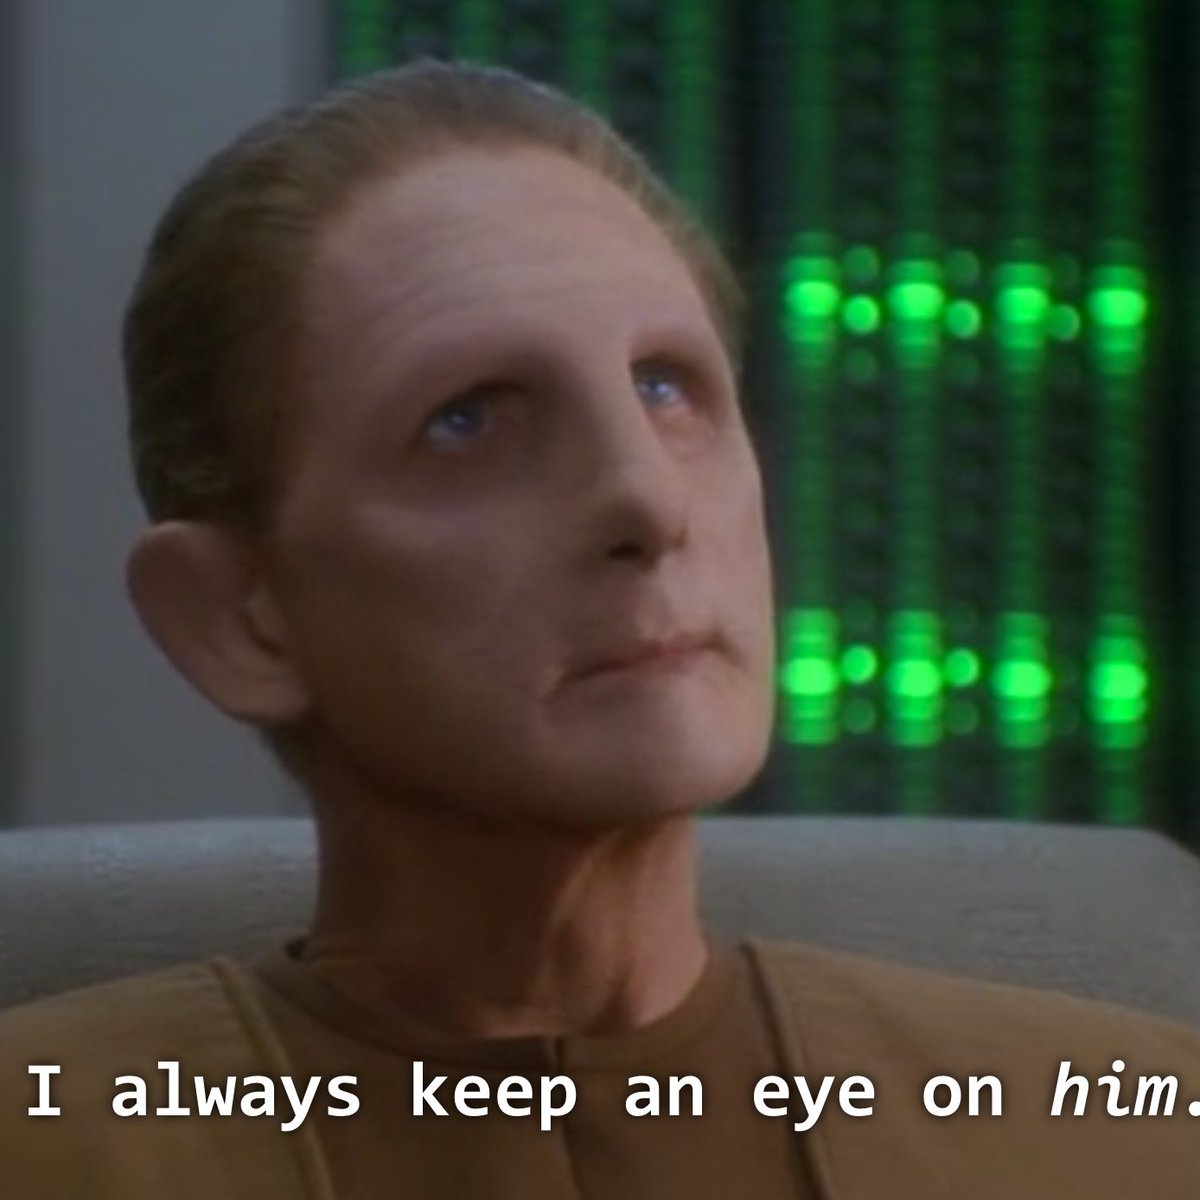 yes, Odo, we know